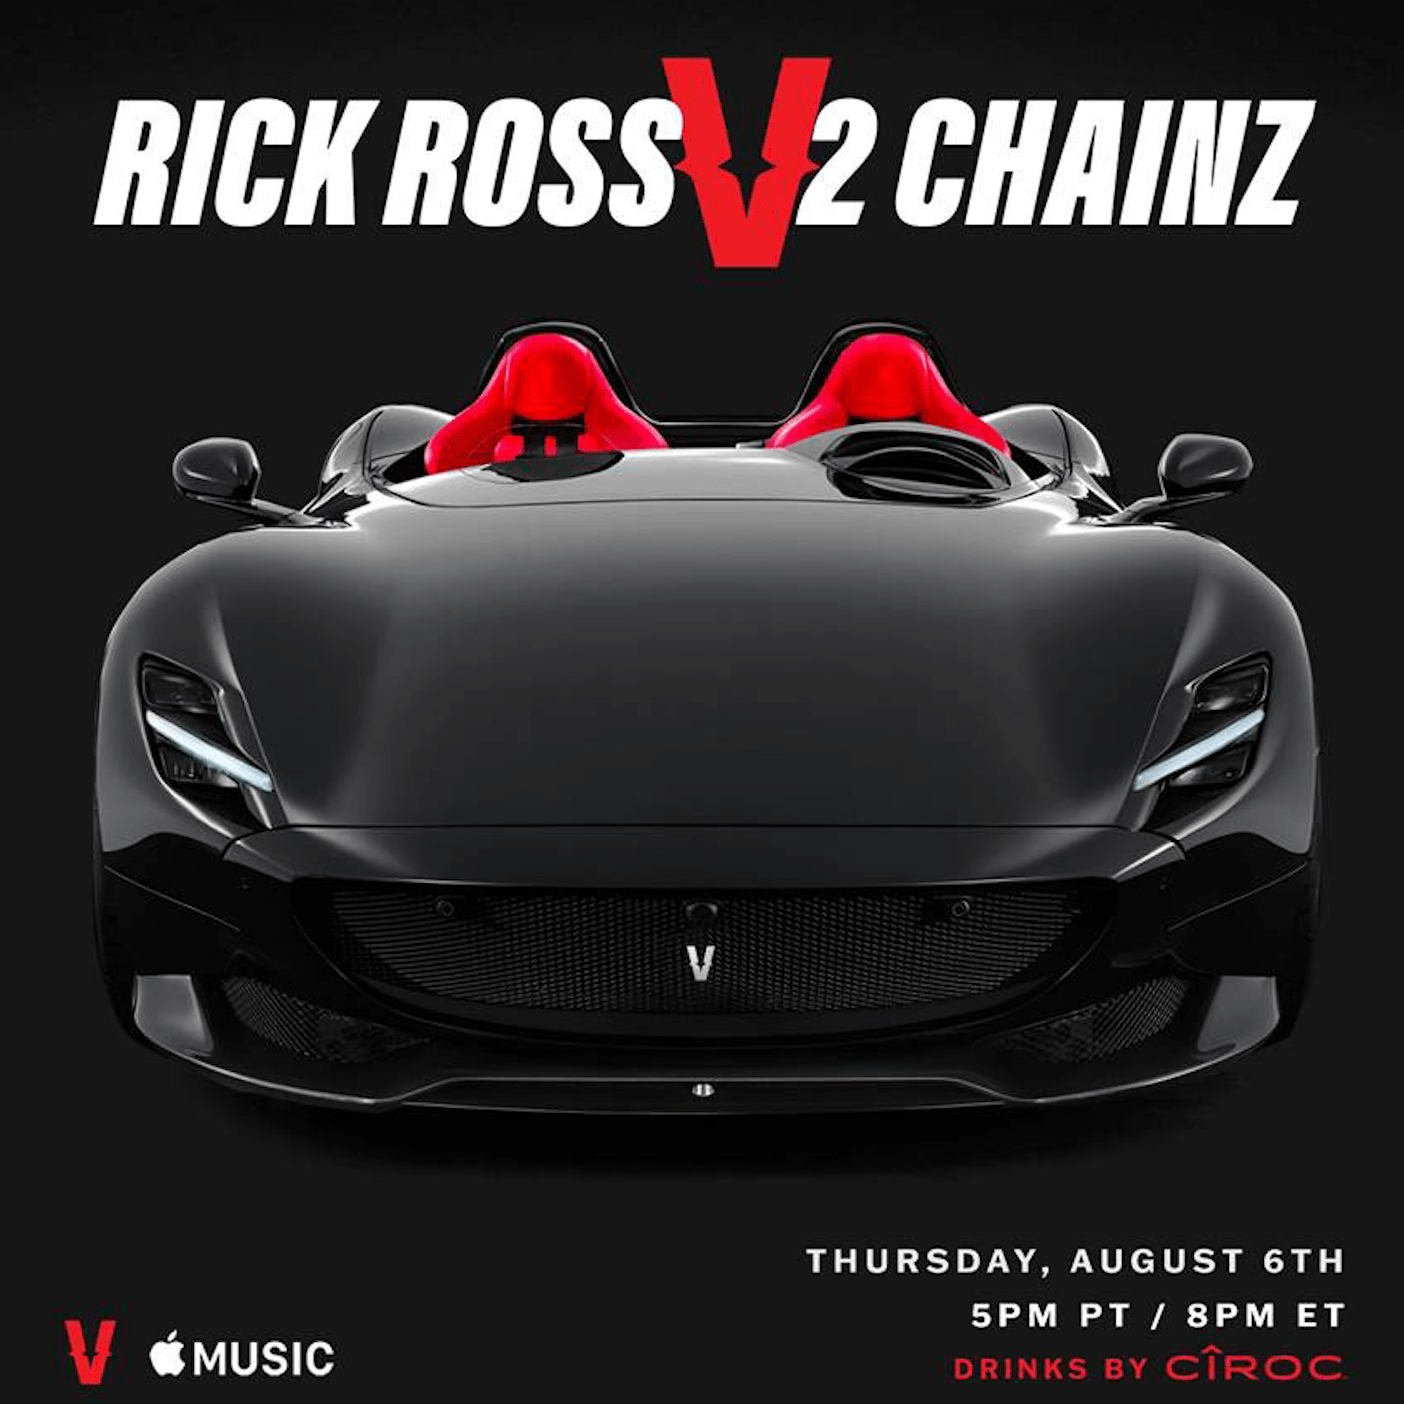 TUNE IN TONIGHT AS 2 CHAINZ AND RICK ROSS GO HEAD-TO-HEAD ON VERZUZ